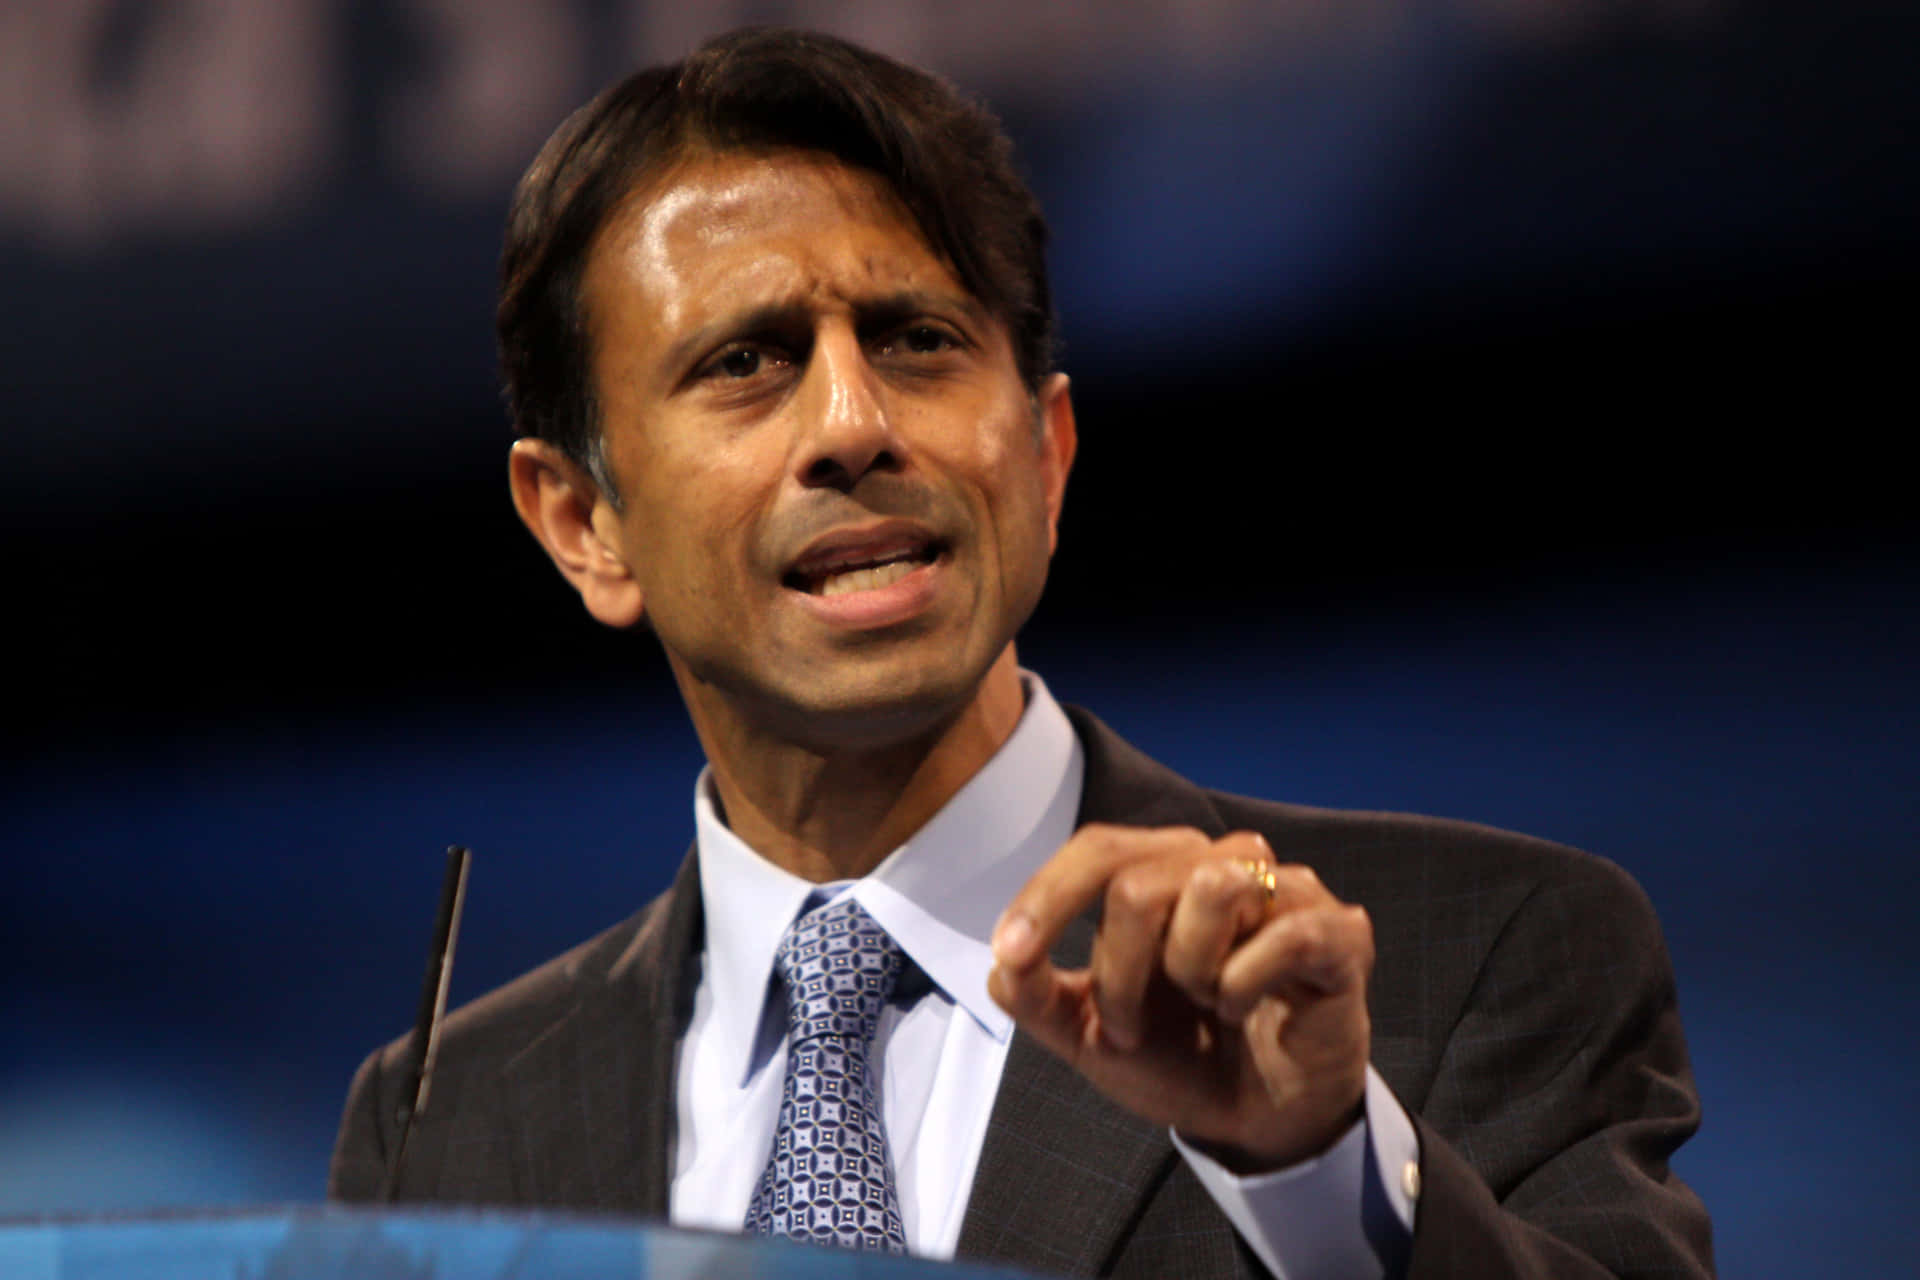 Louisiana's Governor Bobby Jindal delivering an enthusiastic speech. Wallpaper